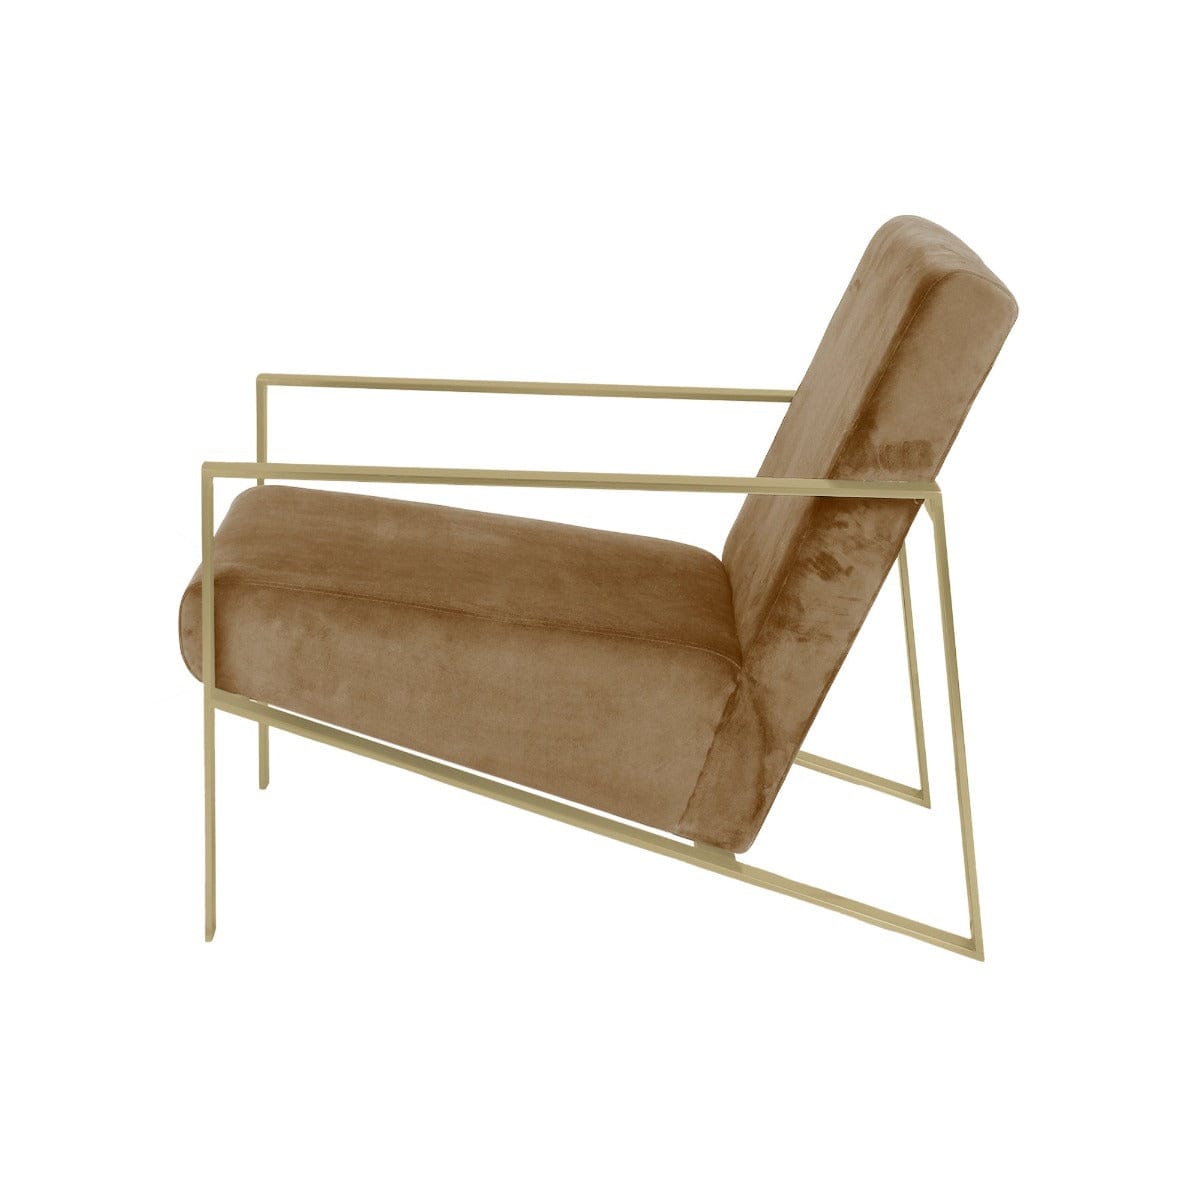 Mosby Beige Velvet Fabric Lounge Chair In Gold Finish